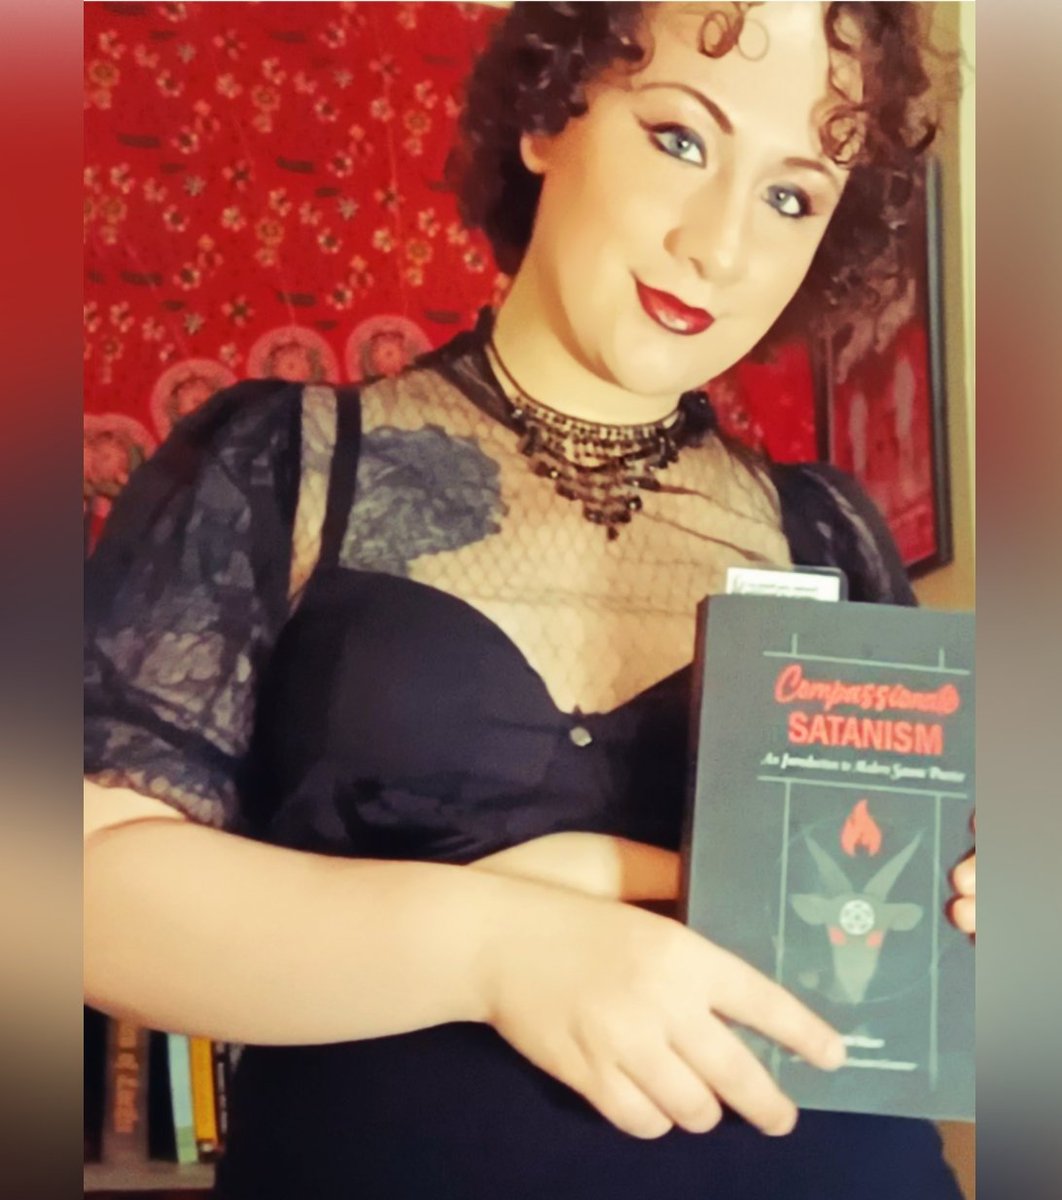 Currently reading & discussing Compassionate Satanism by Lilith Starr on my Onlyfans. Join for some commentary and learning. 🤘😈🤘 #booklover #dominatrix #books #reading #satanic #religiousfreedom #philosophy #satanism #atheism #satanist #lilith